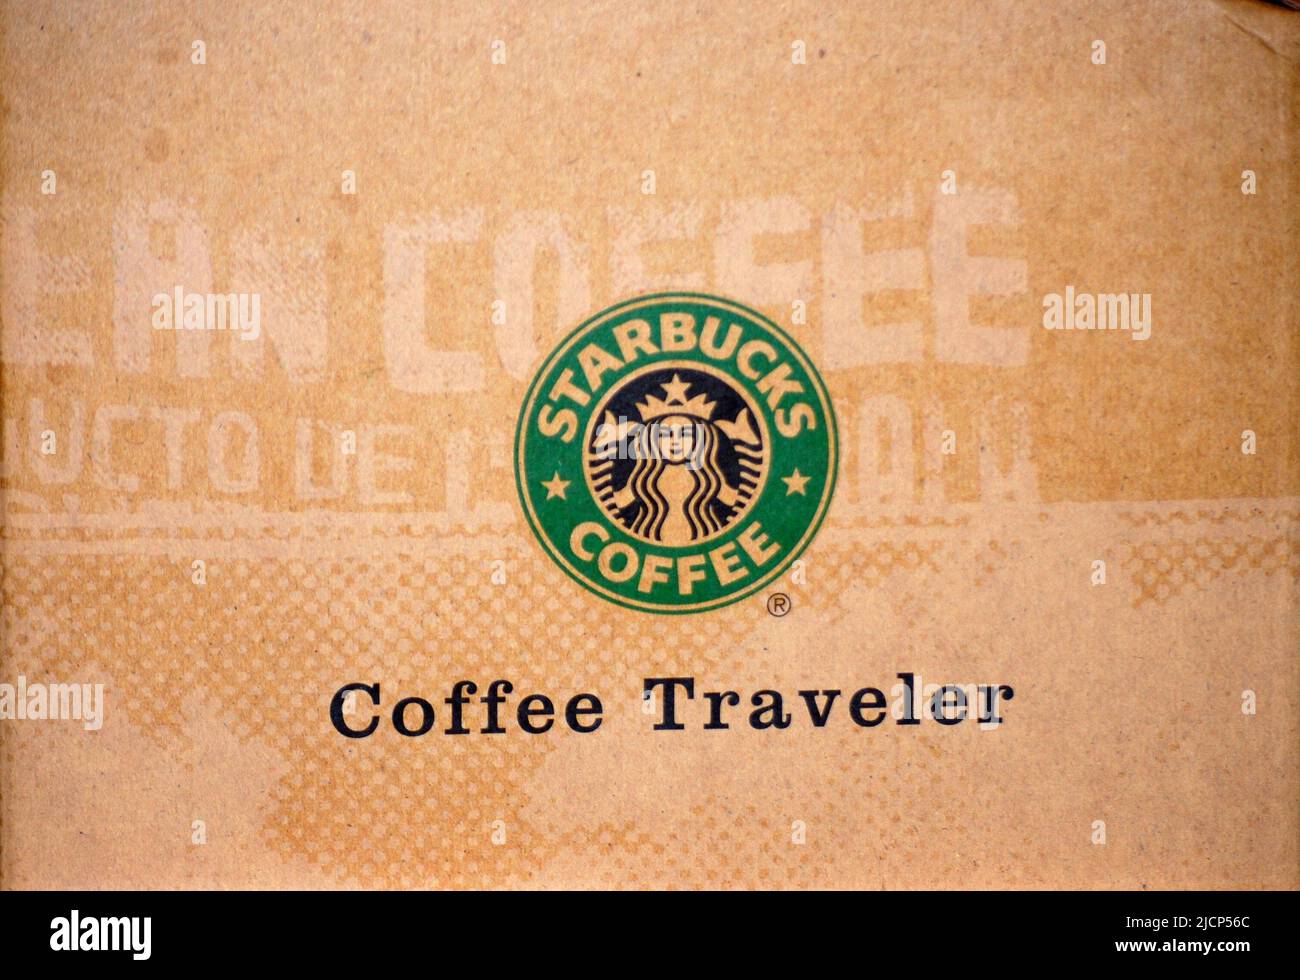 Close up of a Starbucks Coffee logo on a Coffee Traveler Stock Photo